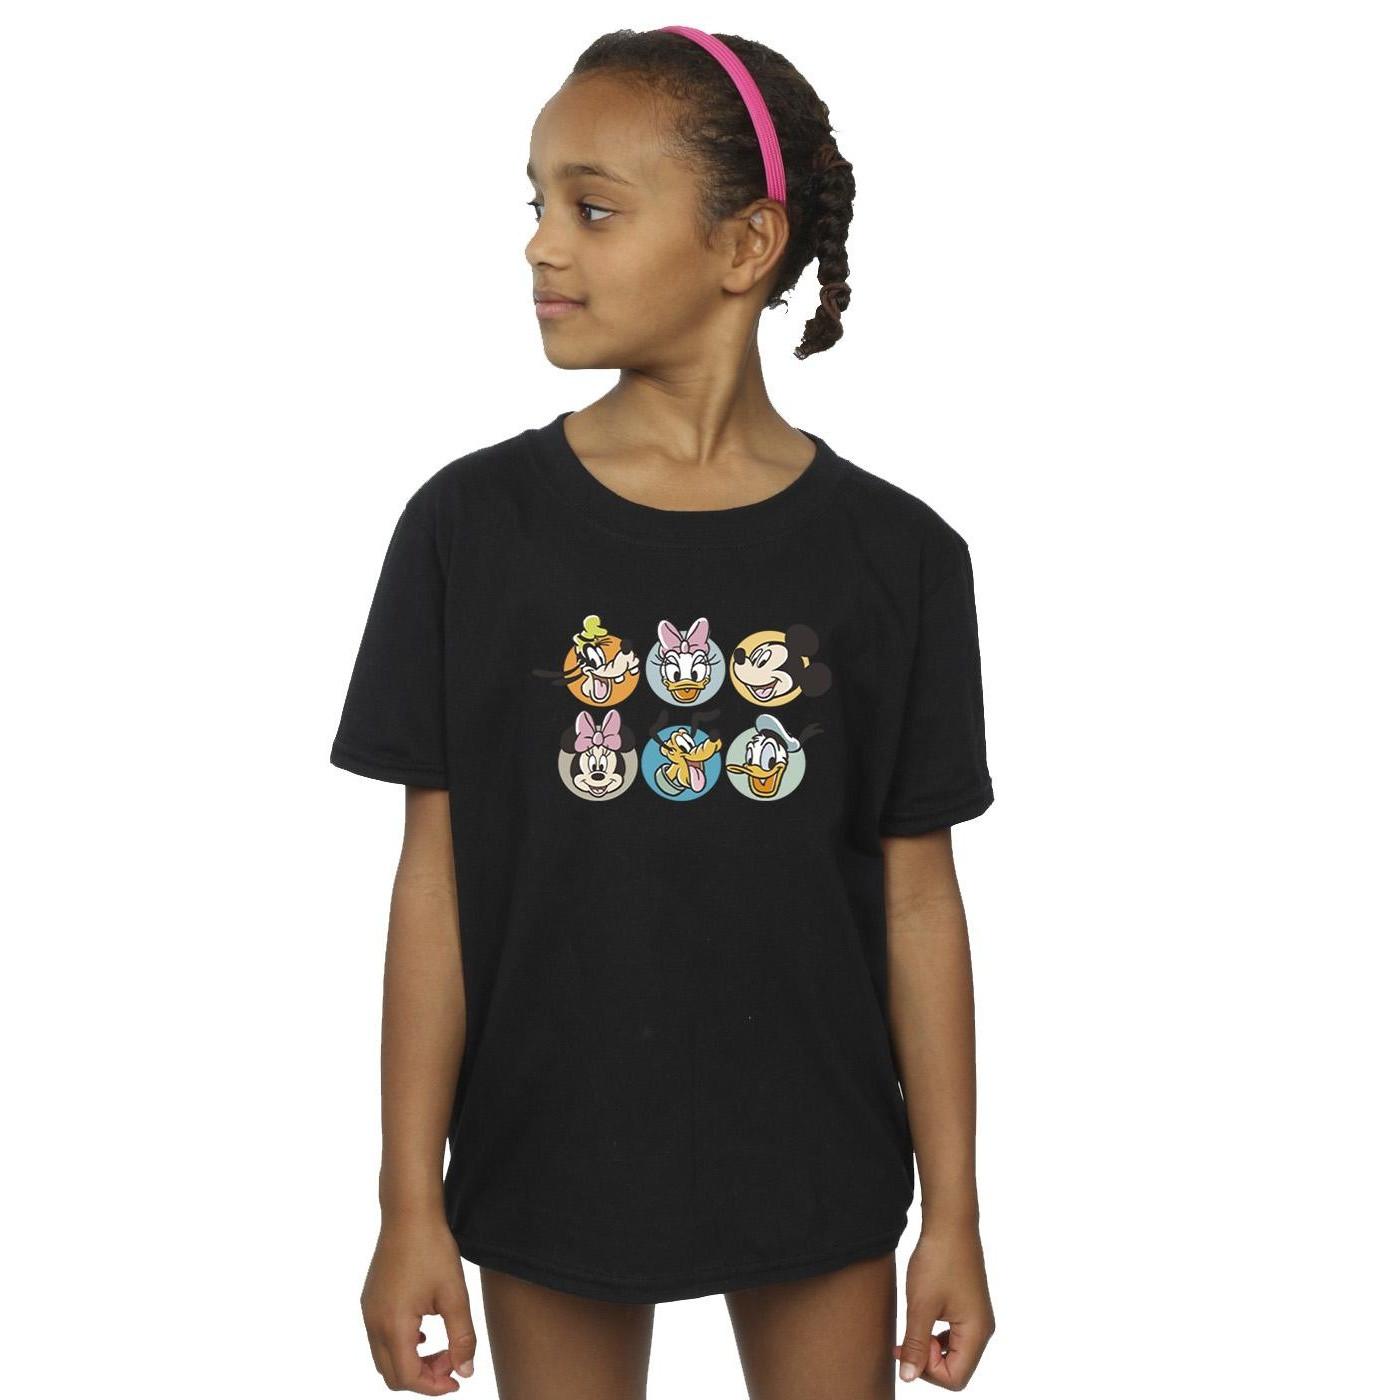 Disney  Tshirt MICKEY MOUSE AND FRIENDS FACES 